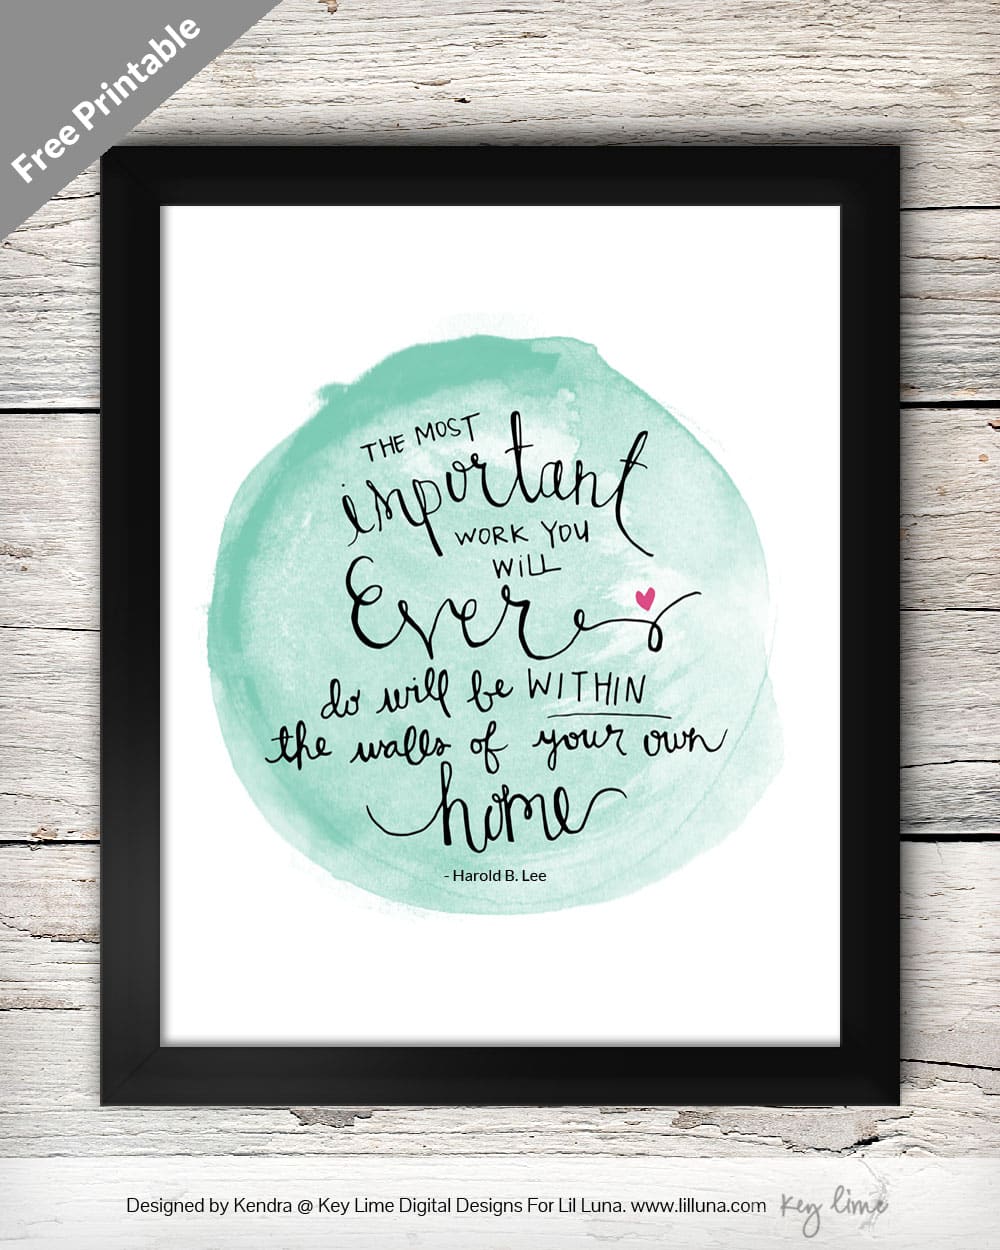 The Most Important Work You will ever do will be within the walls of your own home - LOVE this quote! Free print on { lilluna.com } Put in a frame and makes great decor!